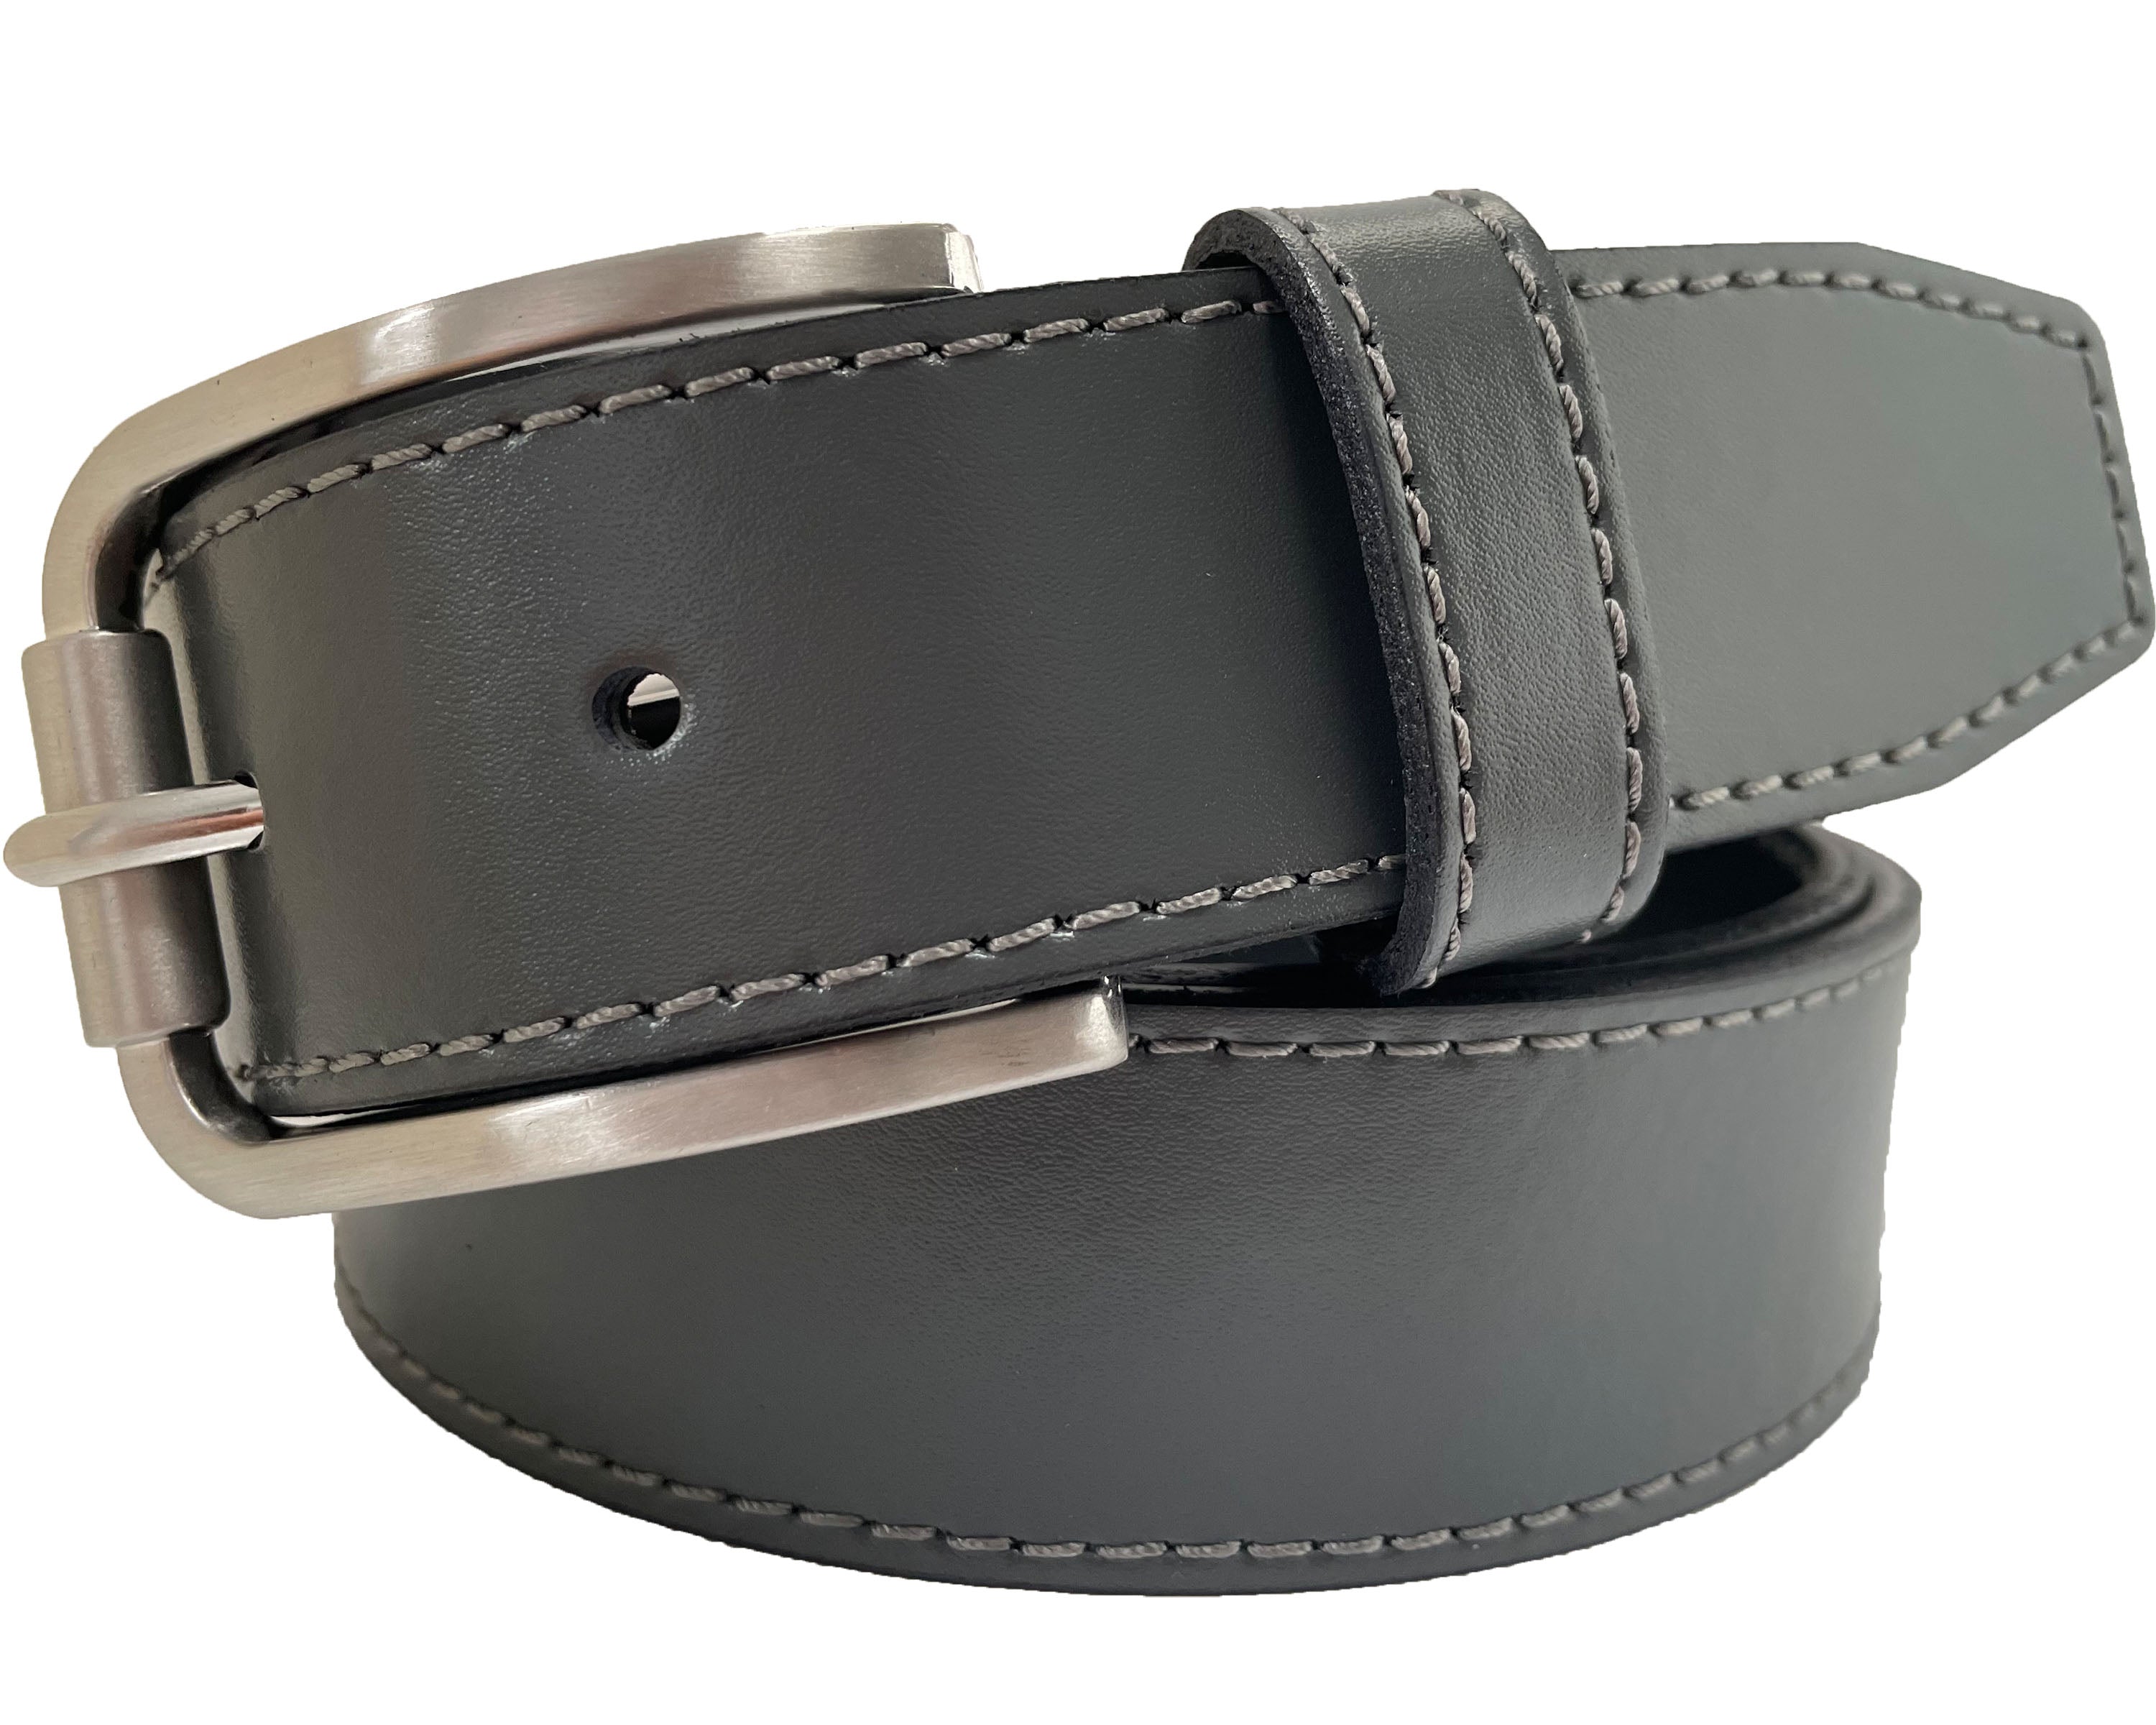 GREY CALF LEATHER 35MM LEATHER BELT ROLL BUCKLE